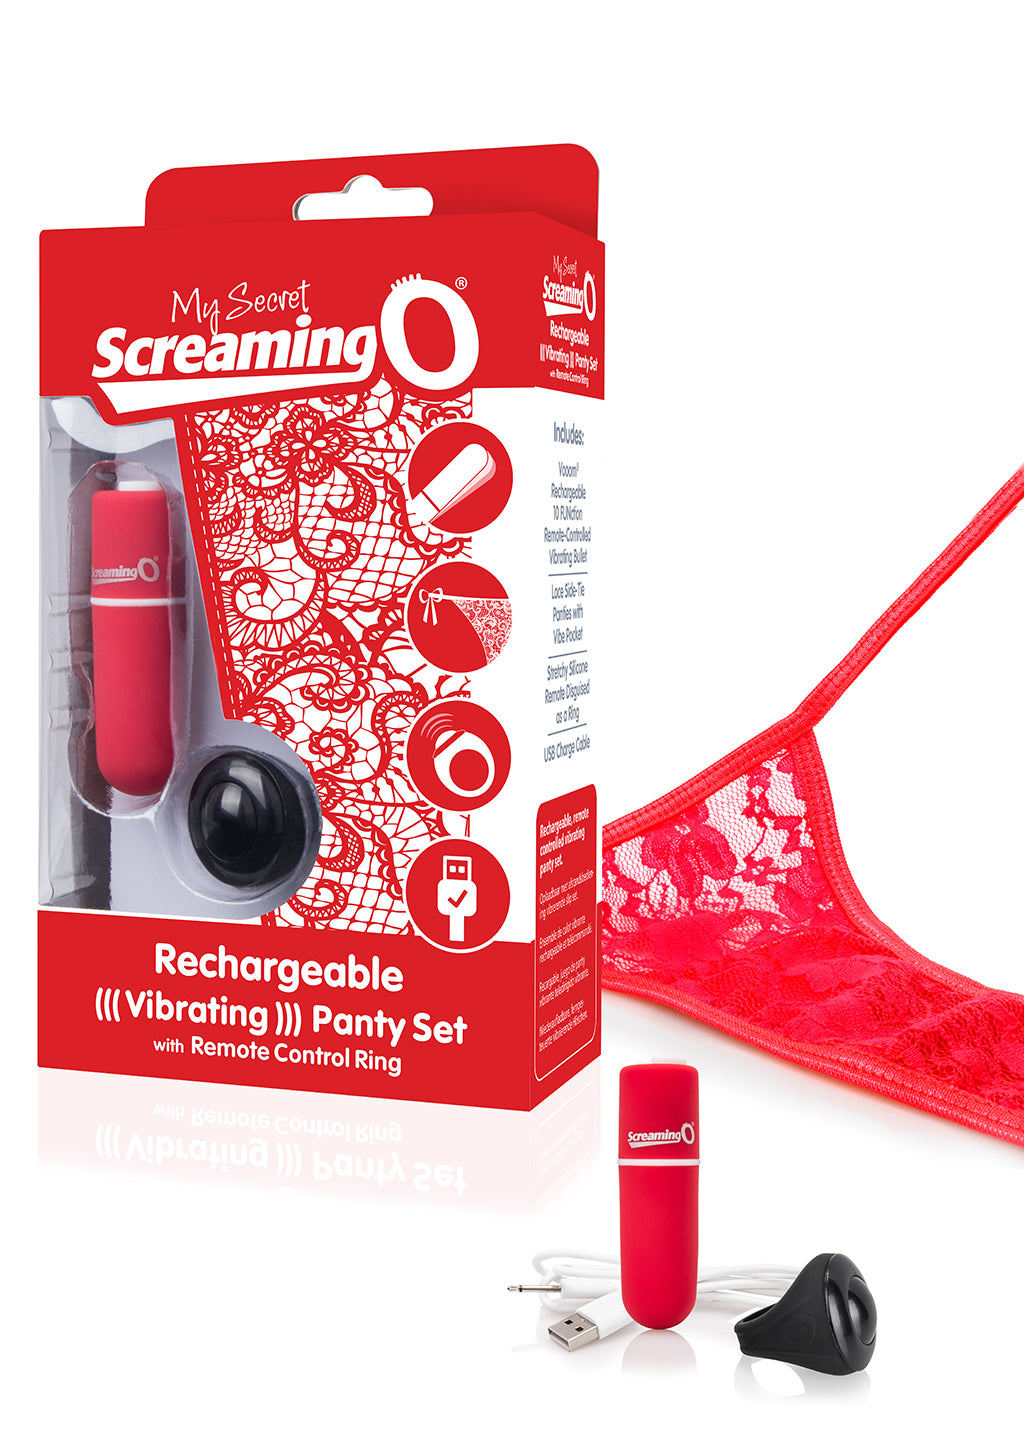 ScreamingO My Secret Charged Remote Control Panty